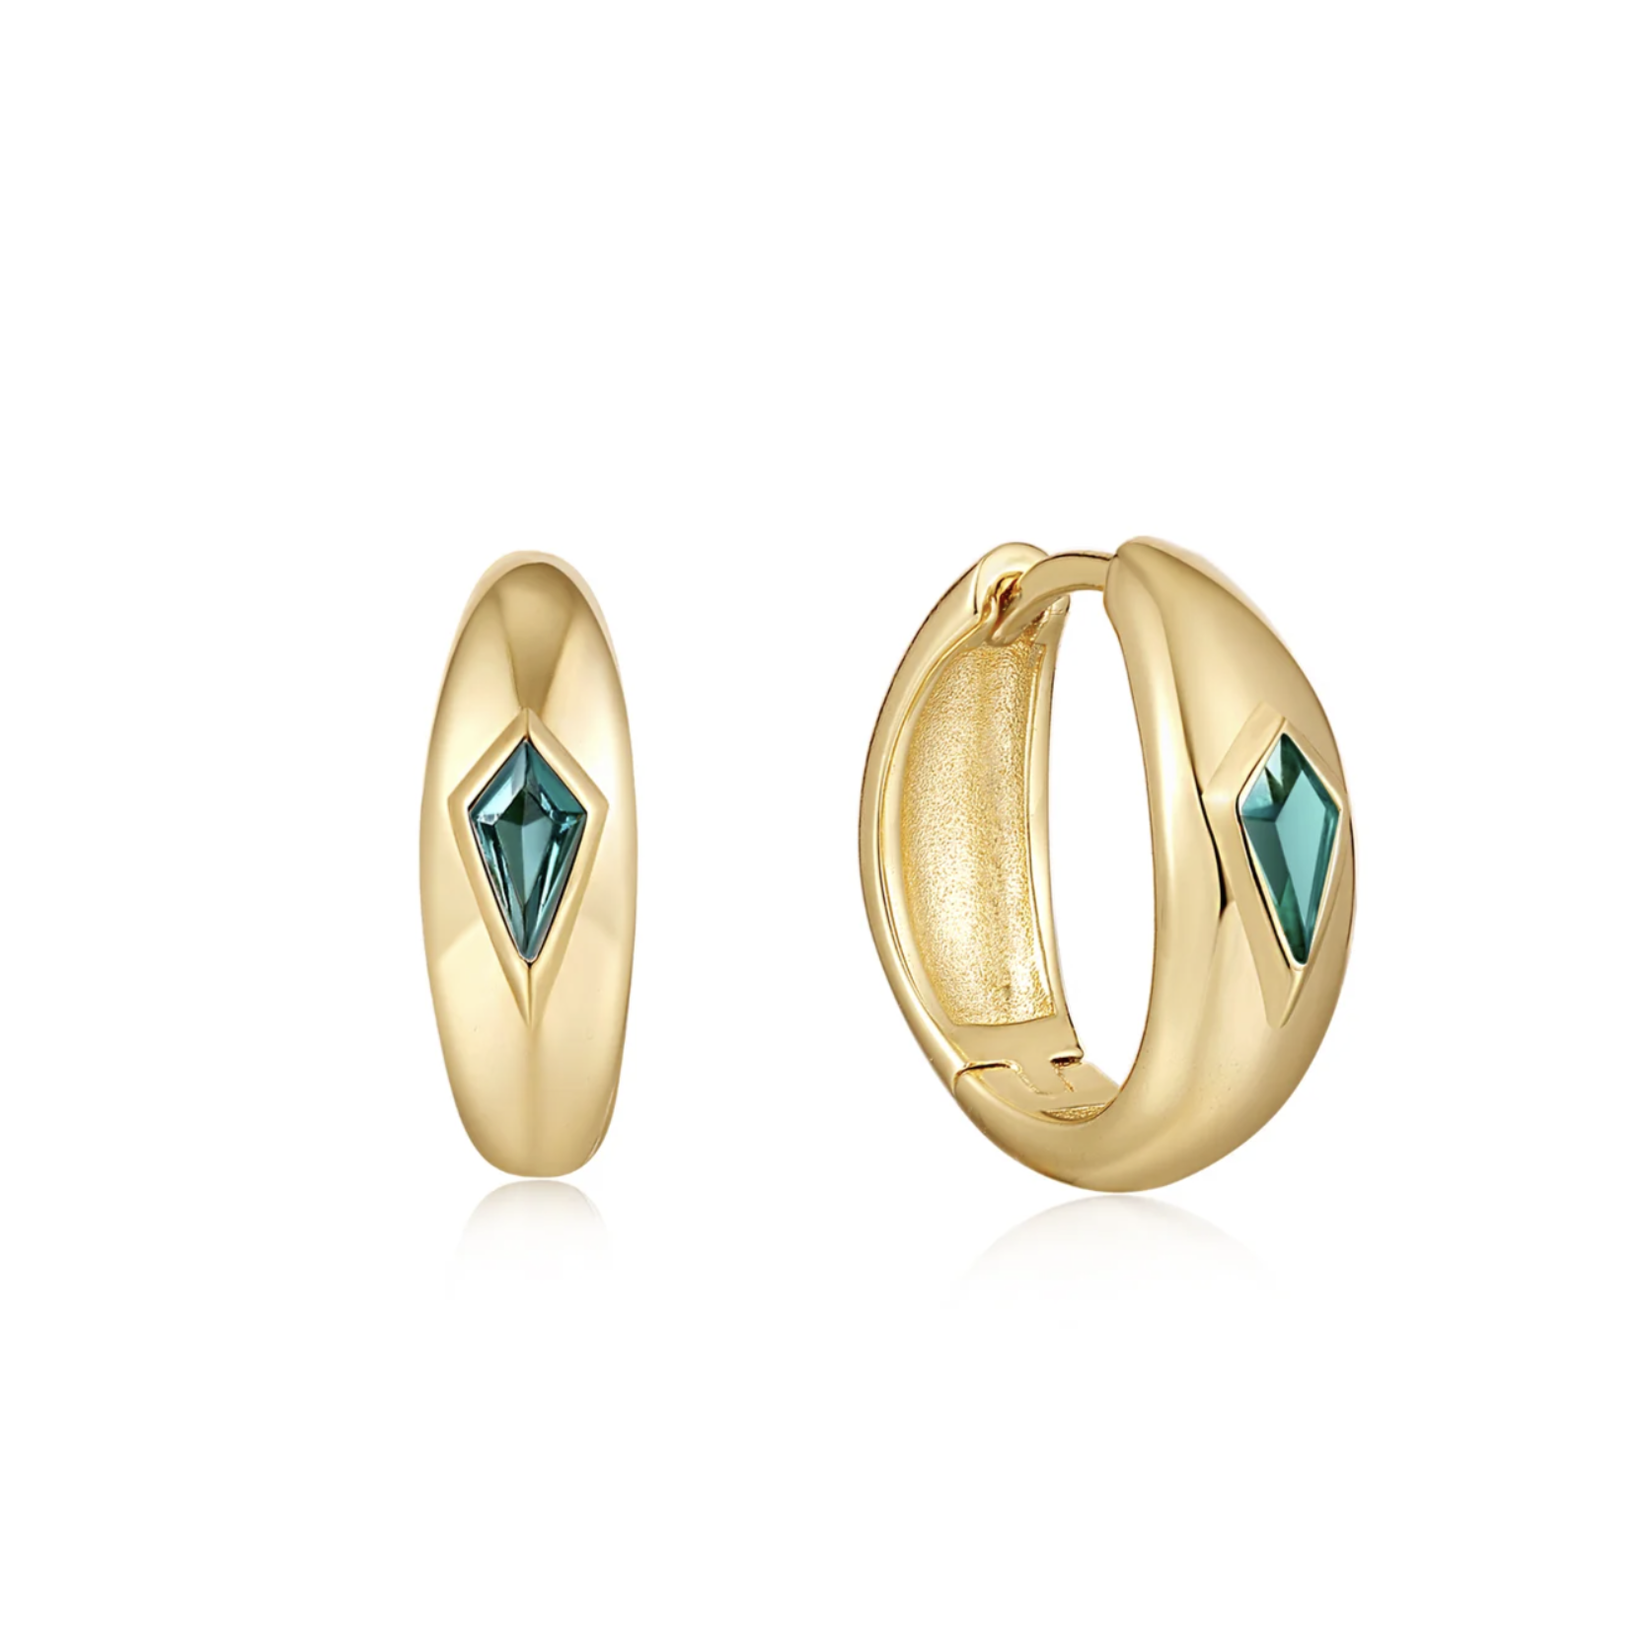 Ania Haie 14K Yellow Gold Plated Teal Sparkle Dome Earrings